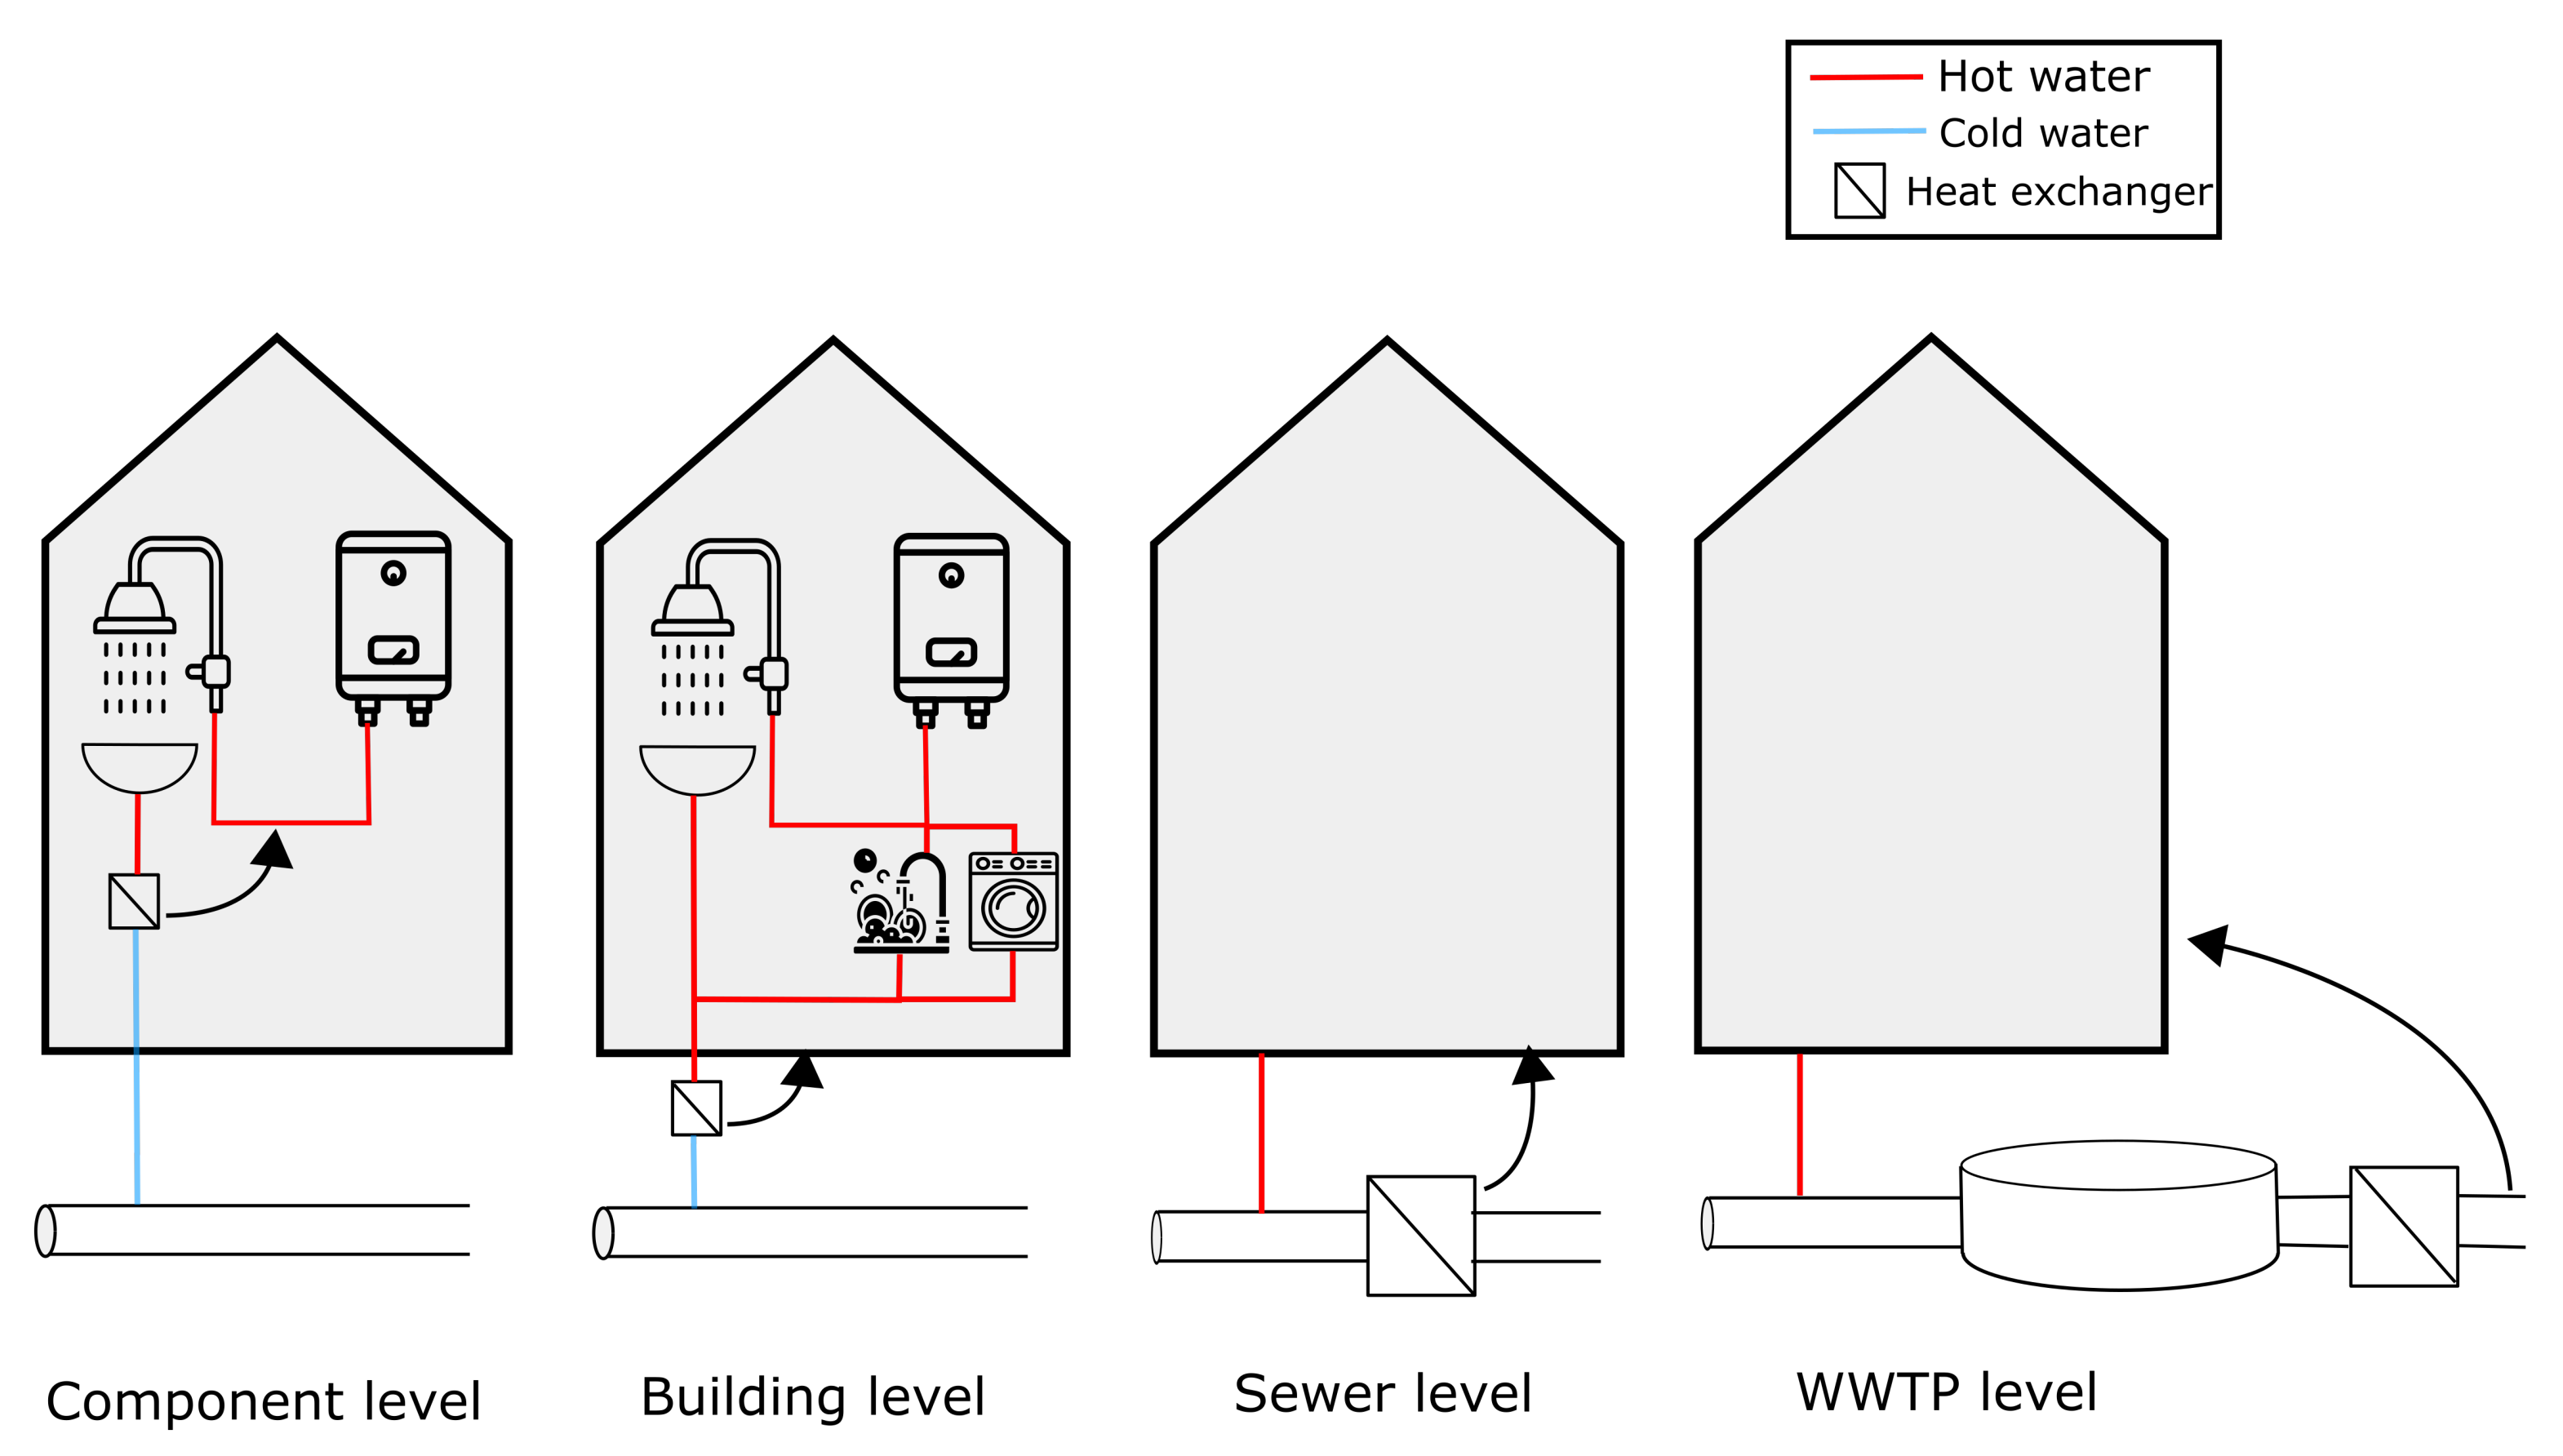 Wastewater Heat Recovery Systems